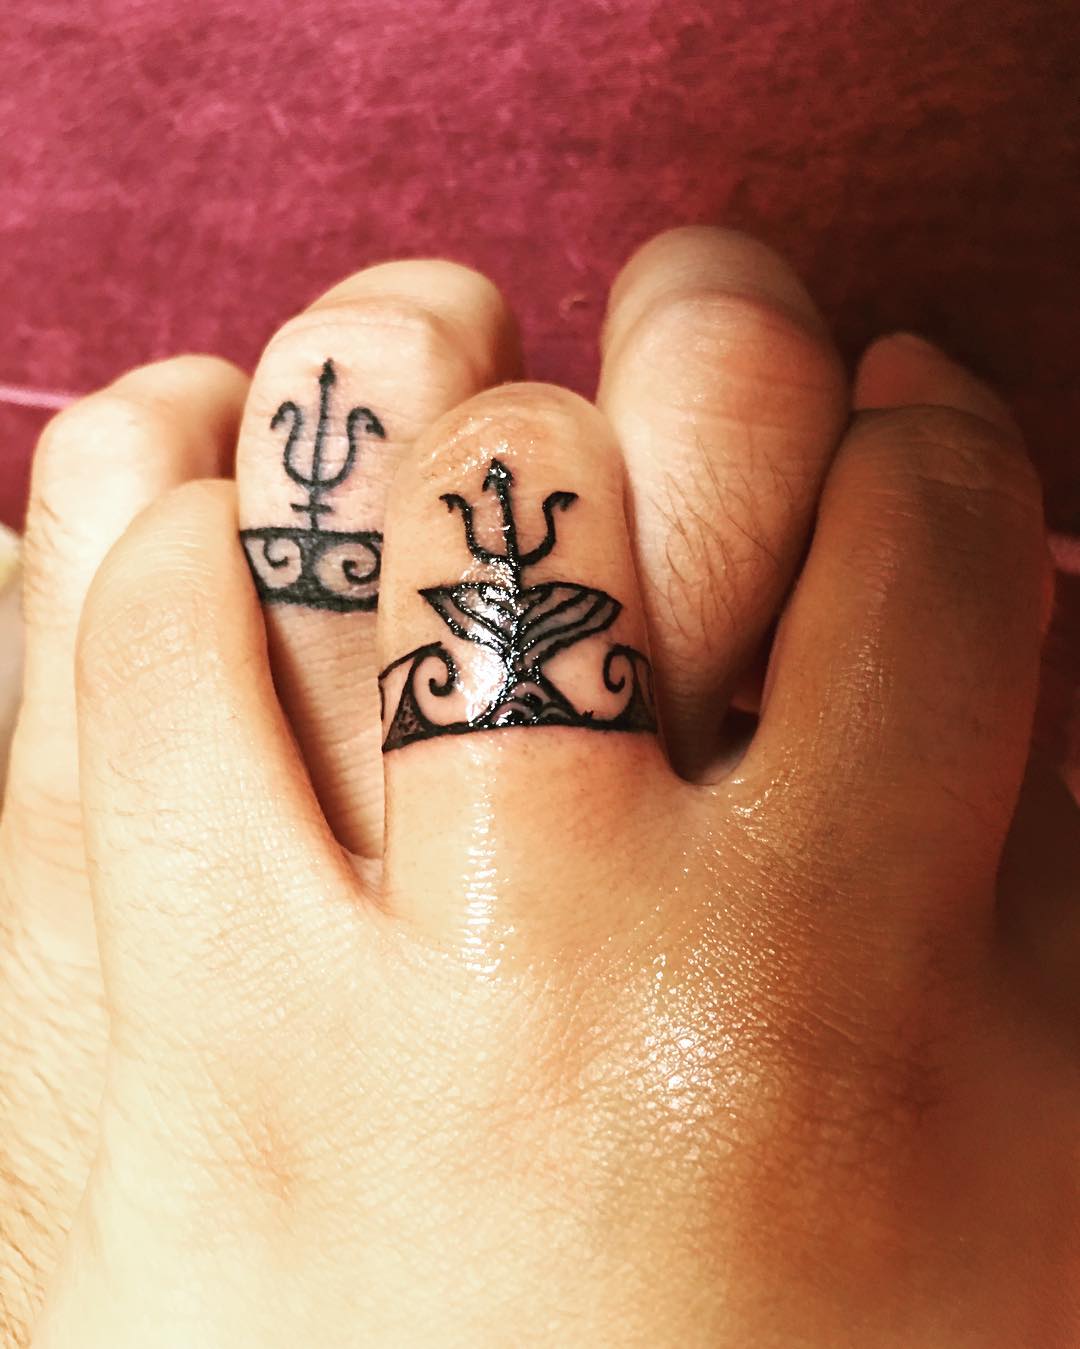 19 Tiny Tattoos To Get In An Unexpected Place | Ring tattoos, Tattoo  wedding rings, Ring finger tattoos